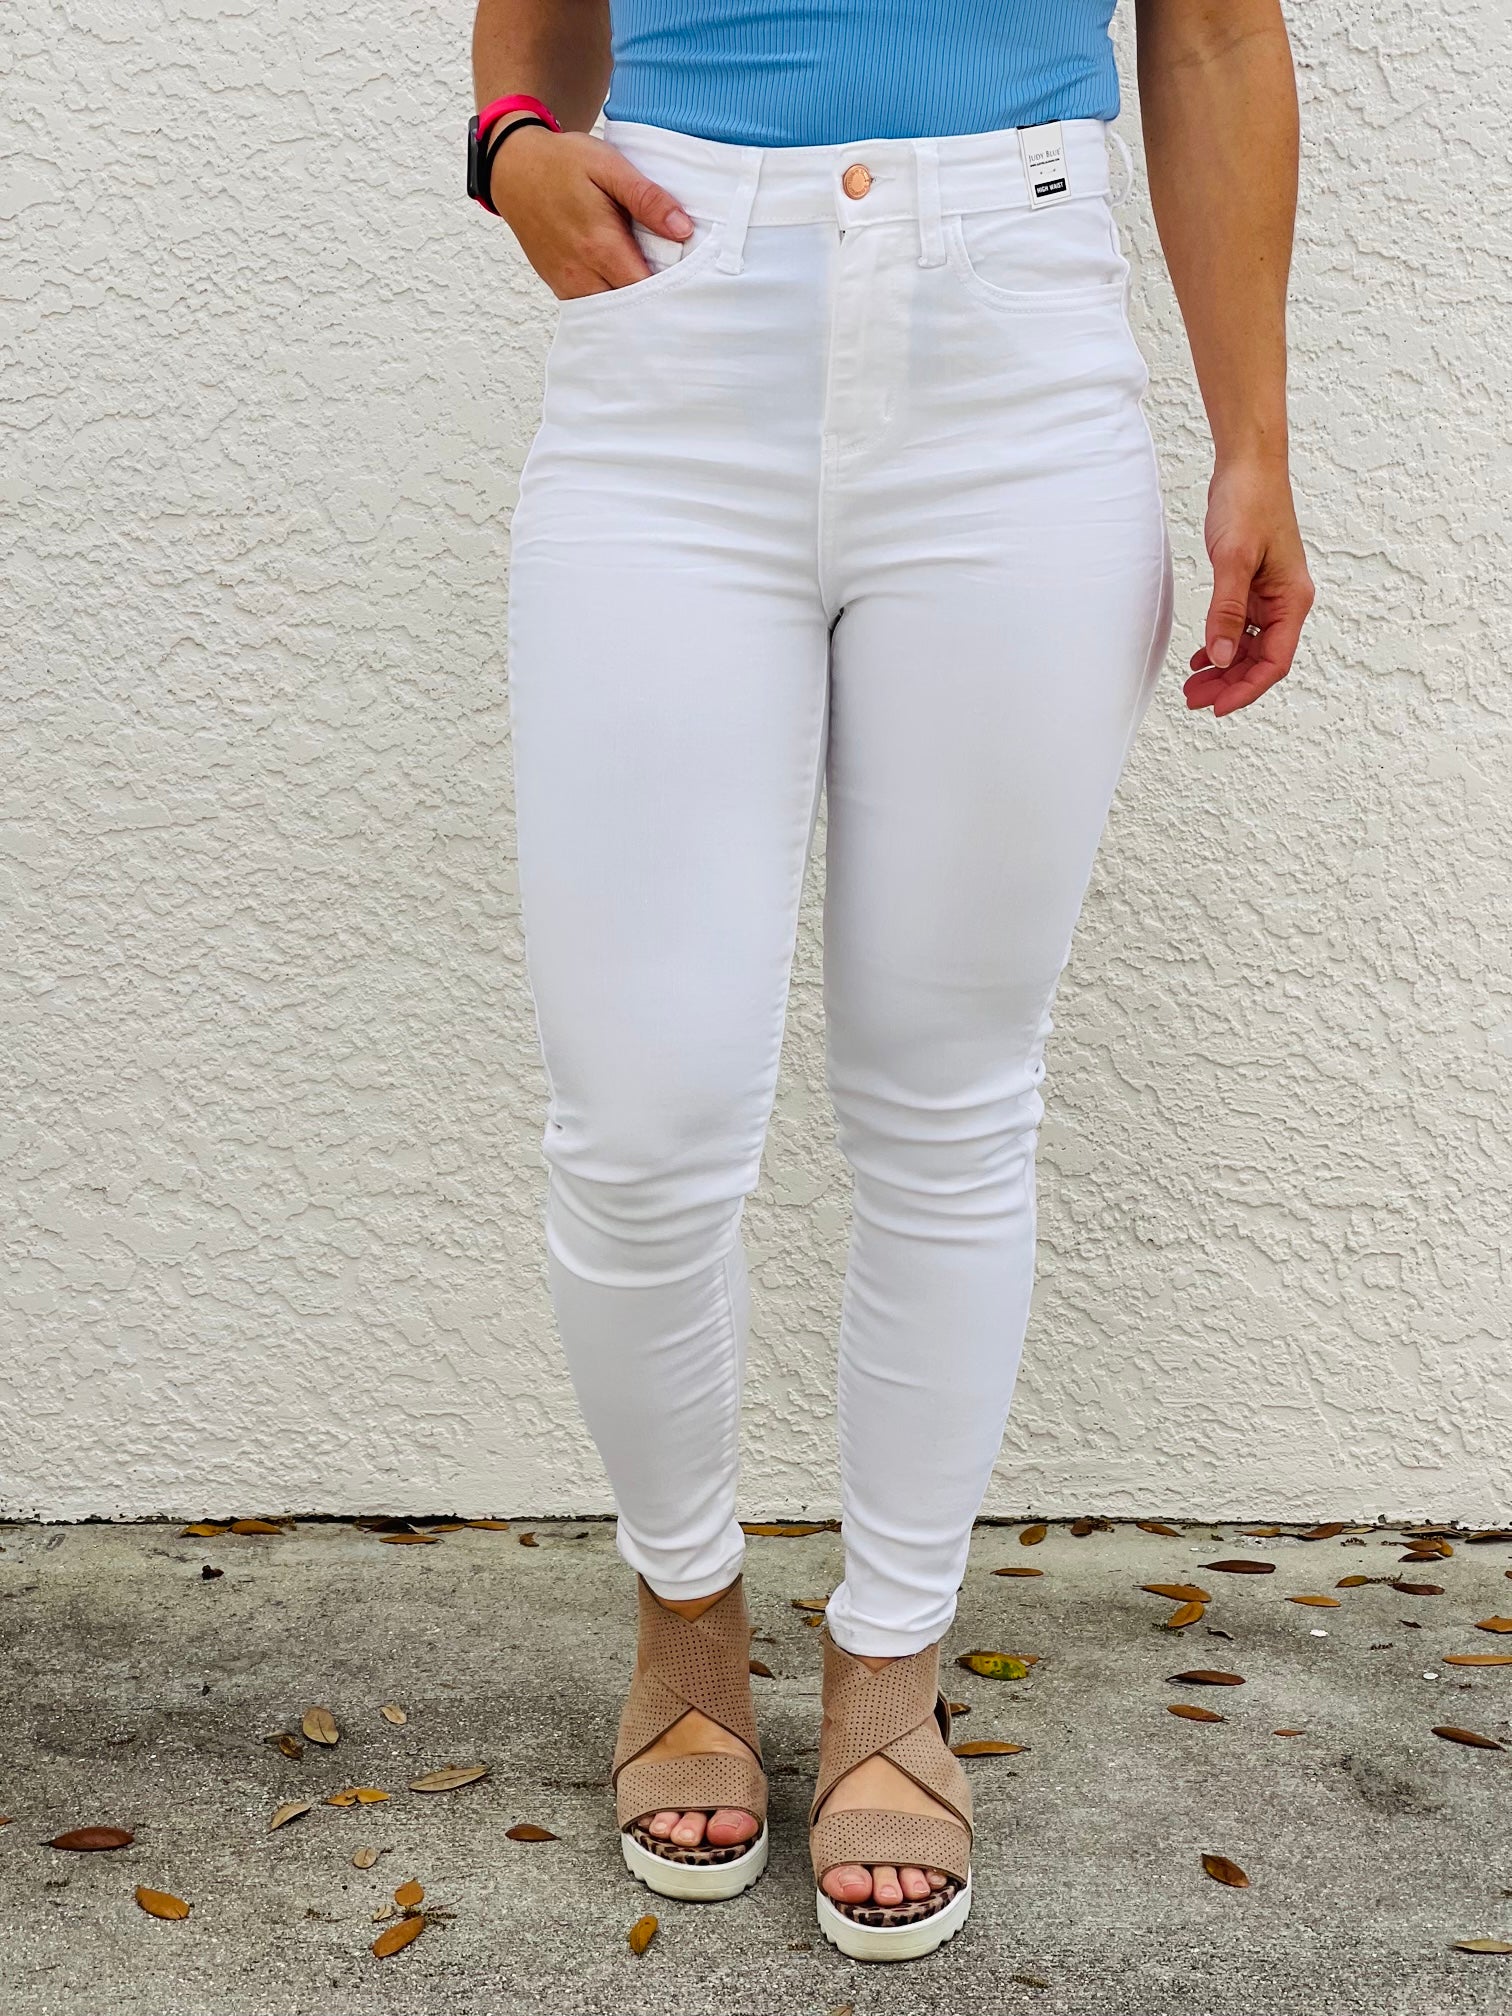 judy blue white jeans